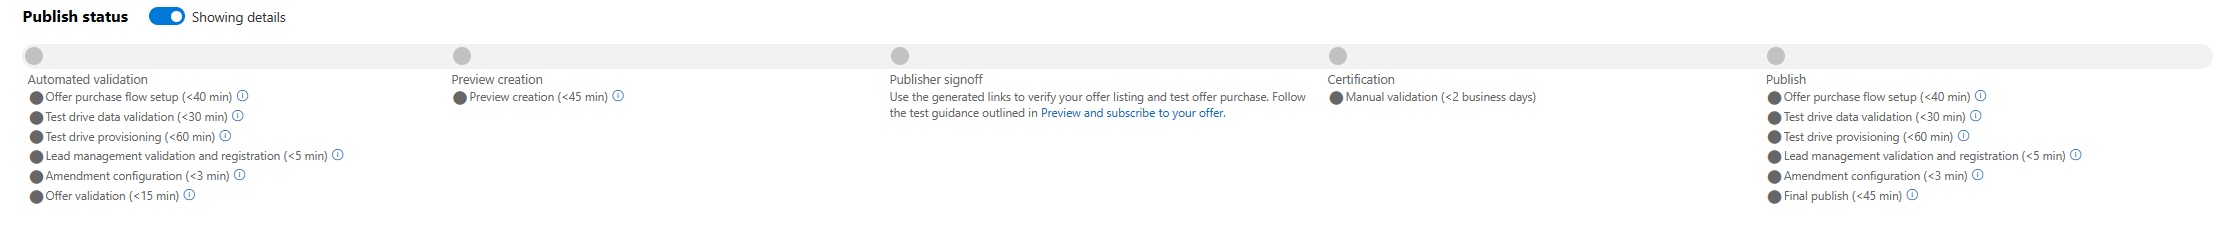 Illustrates the Offer overview page for an offer in Partner Center. The Go live button and preview links are shown. The View validation report link is also shown under Automated validation.